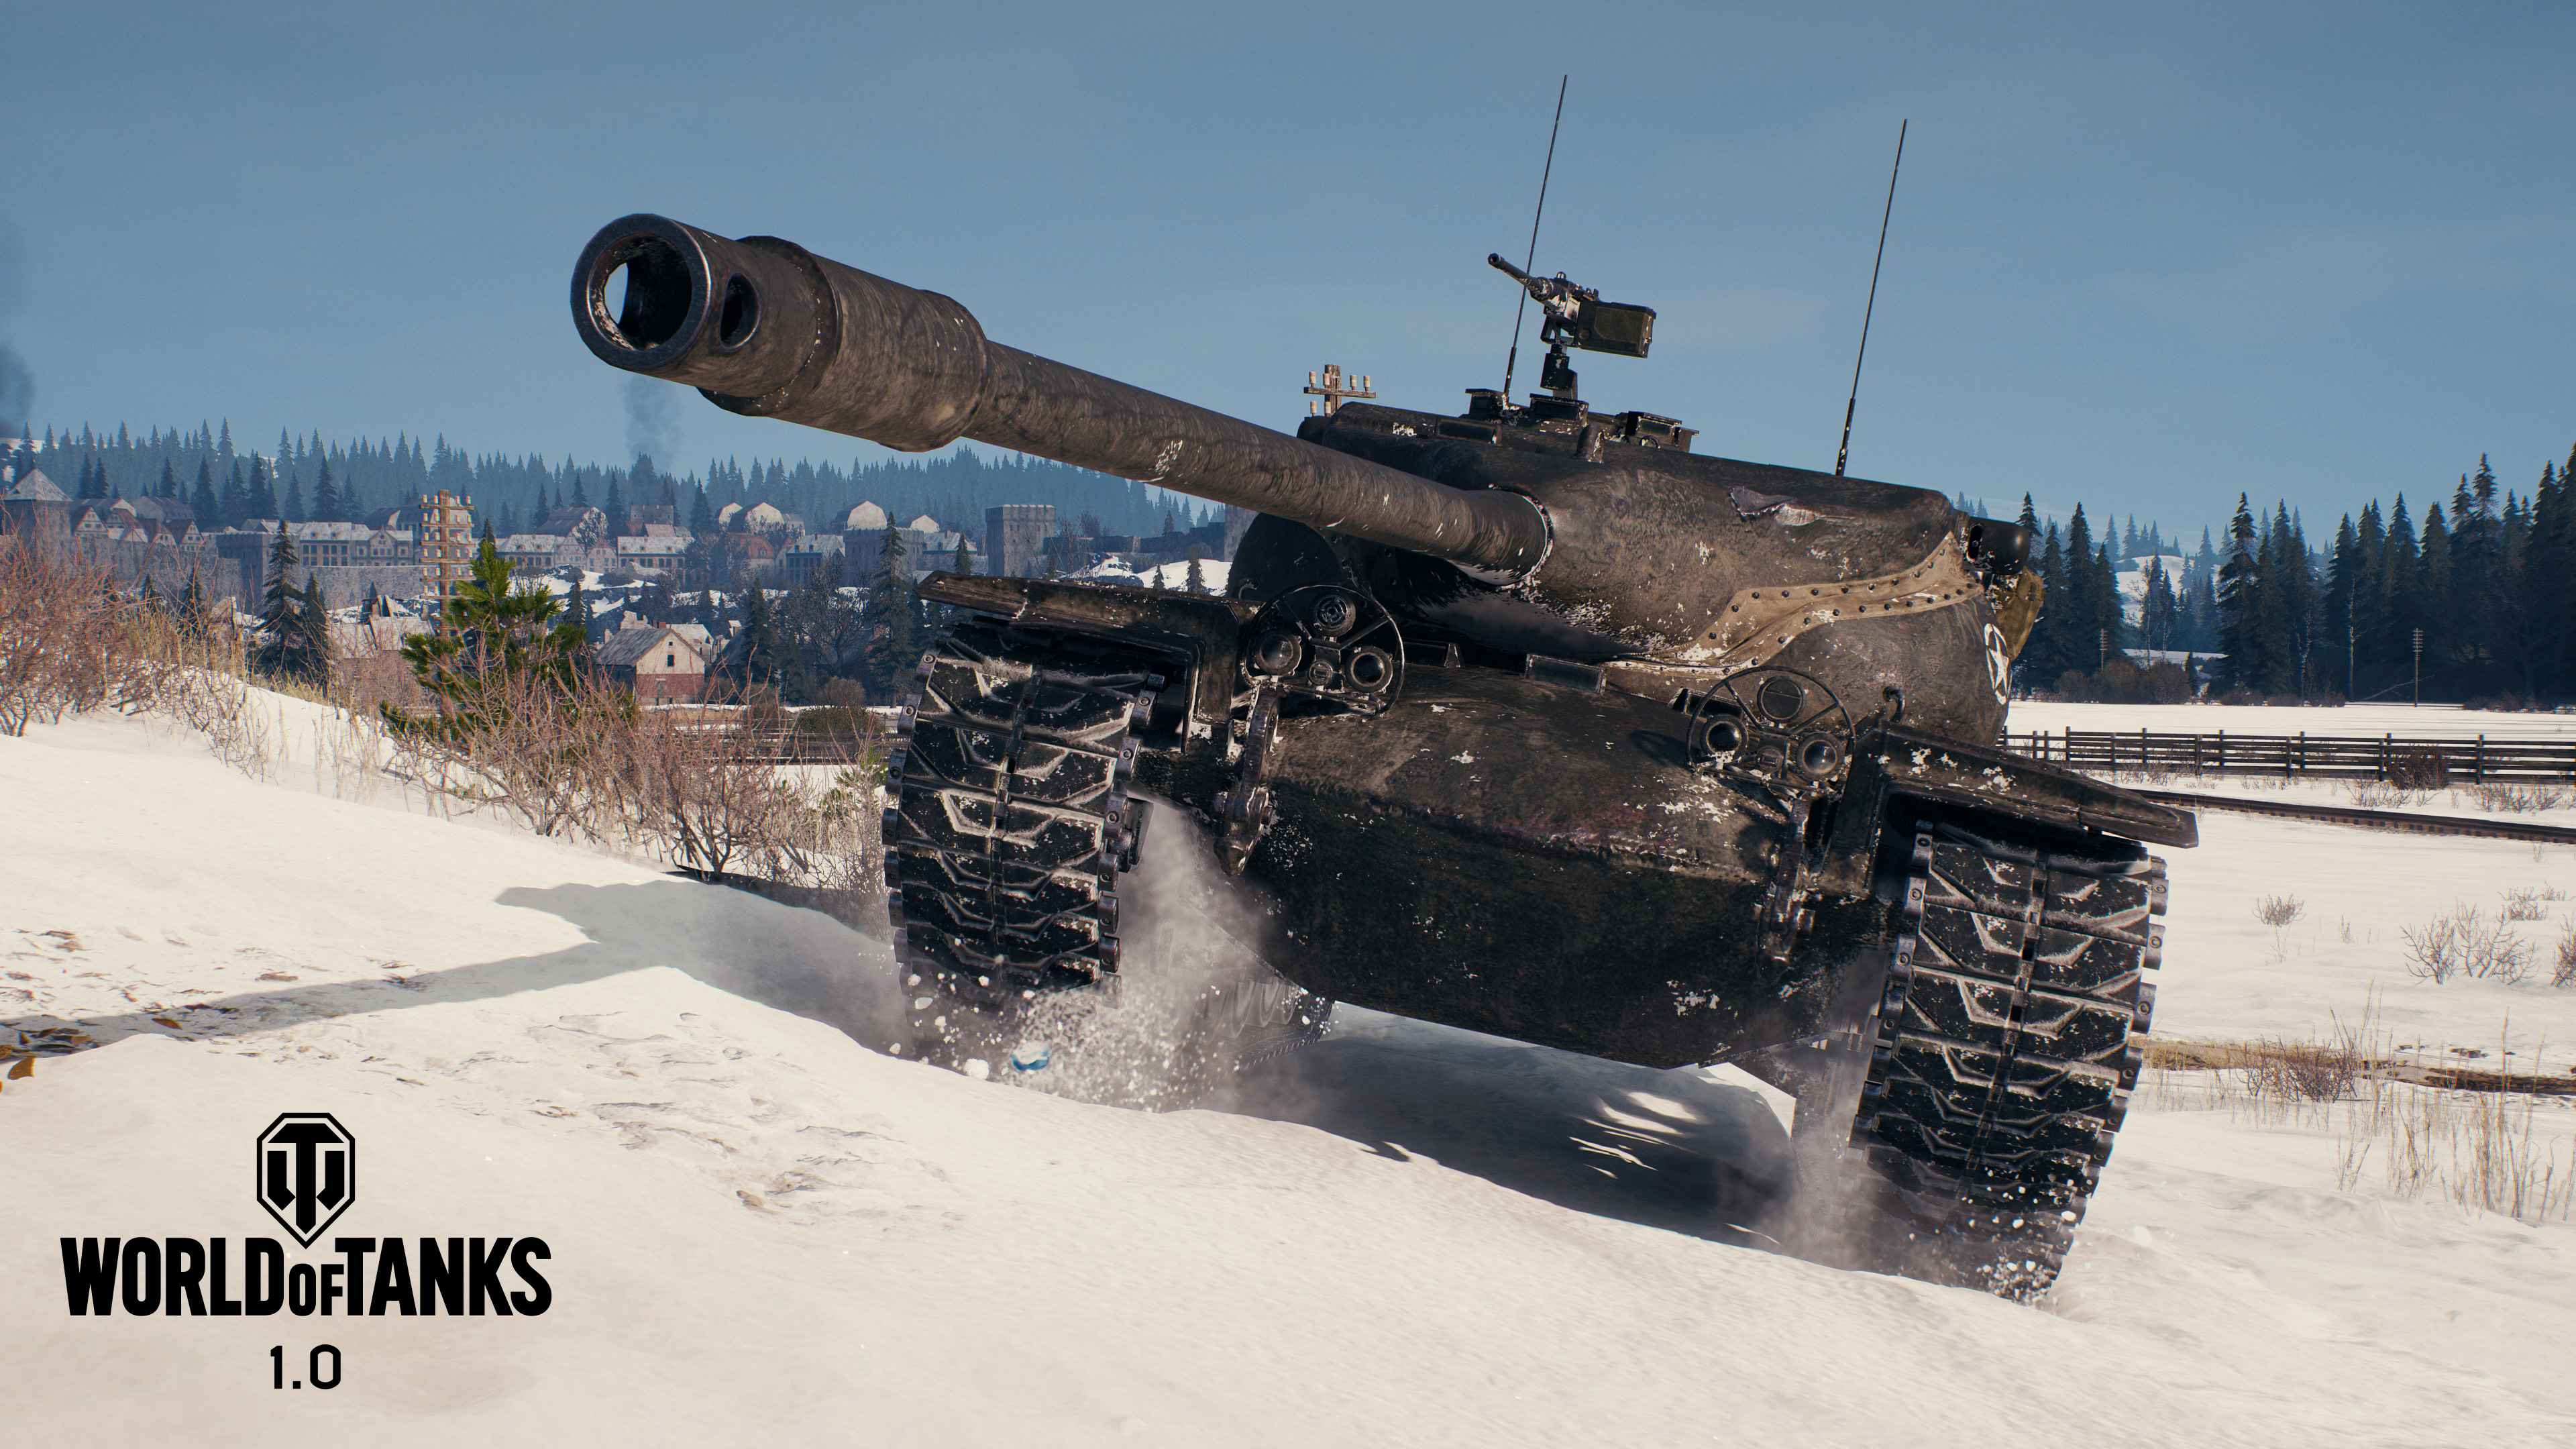 World of Tanks 1.0 is the best looking game you can run on a potato